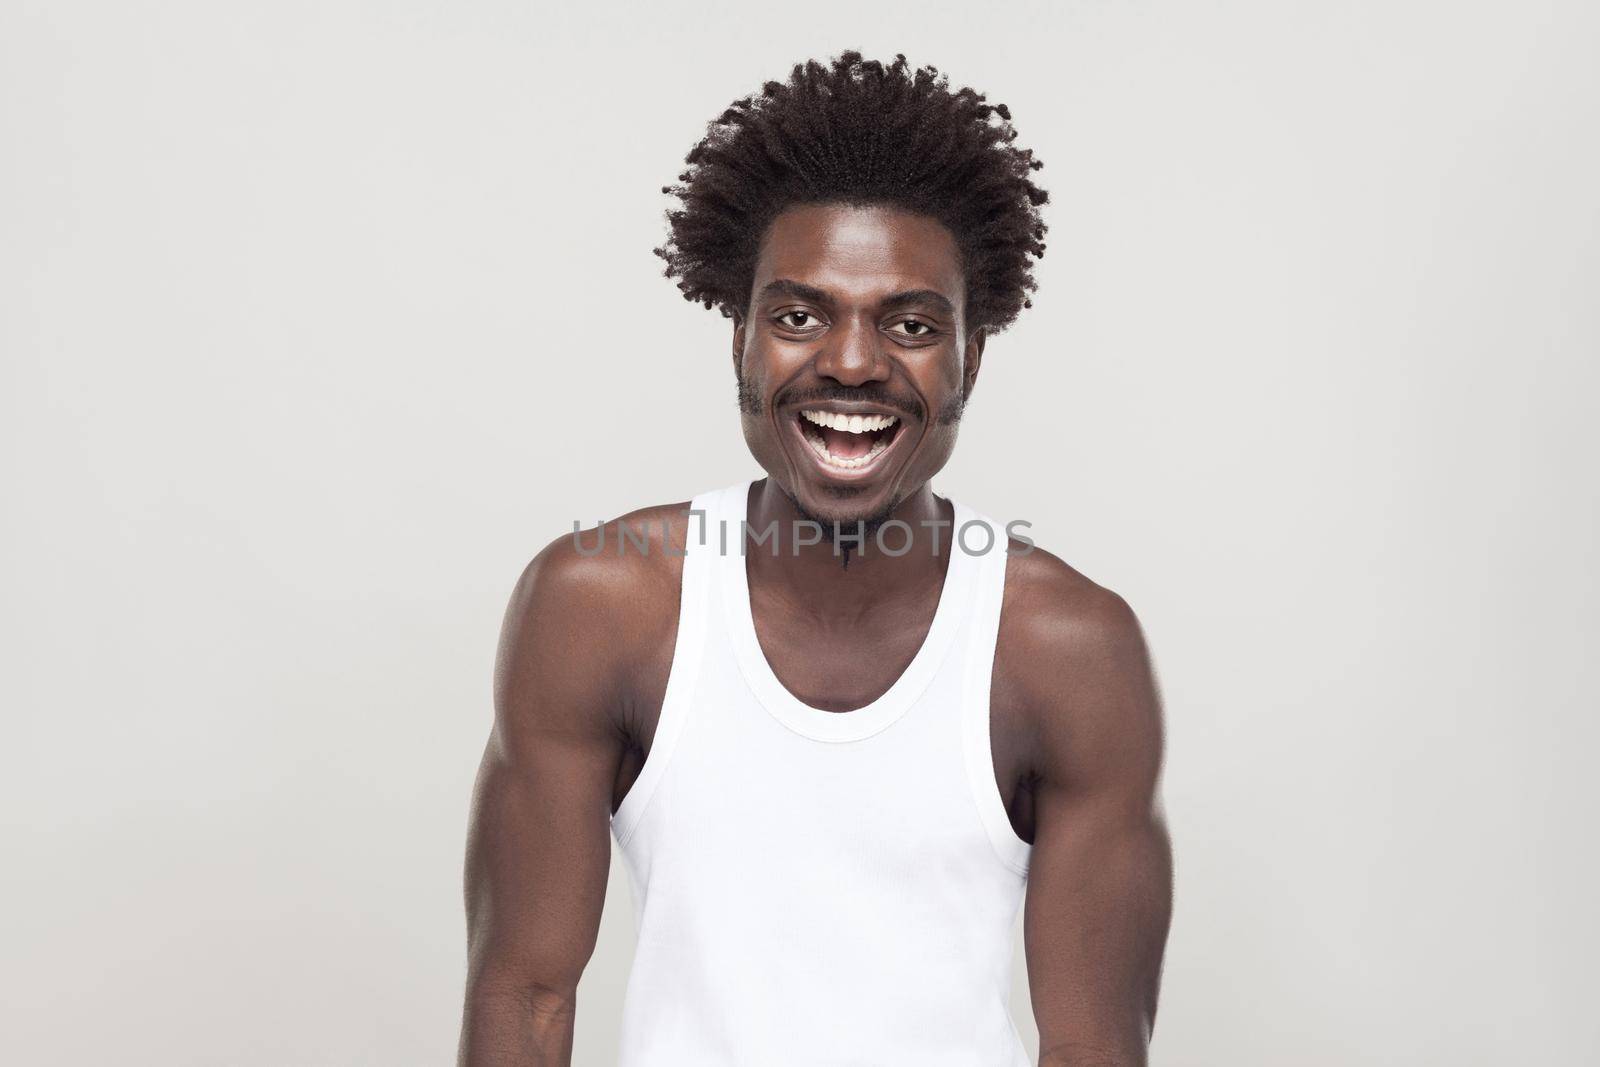 Laughing and positive concept. Man looking at camera and smiling. Studio shot. Gray background